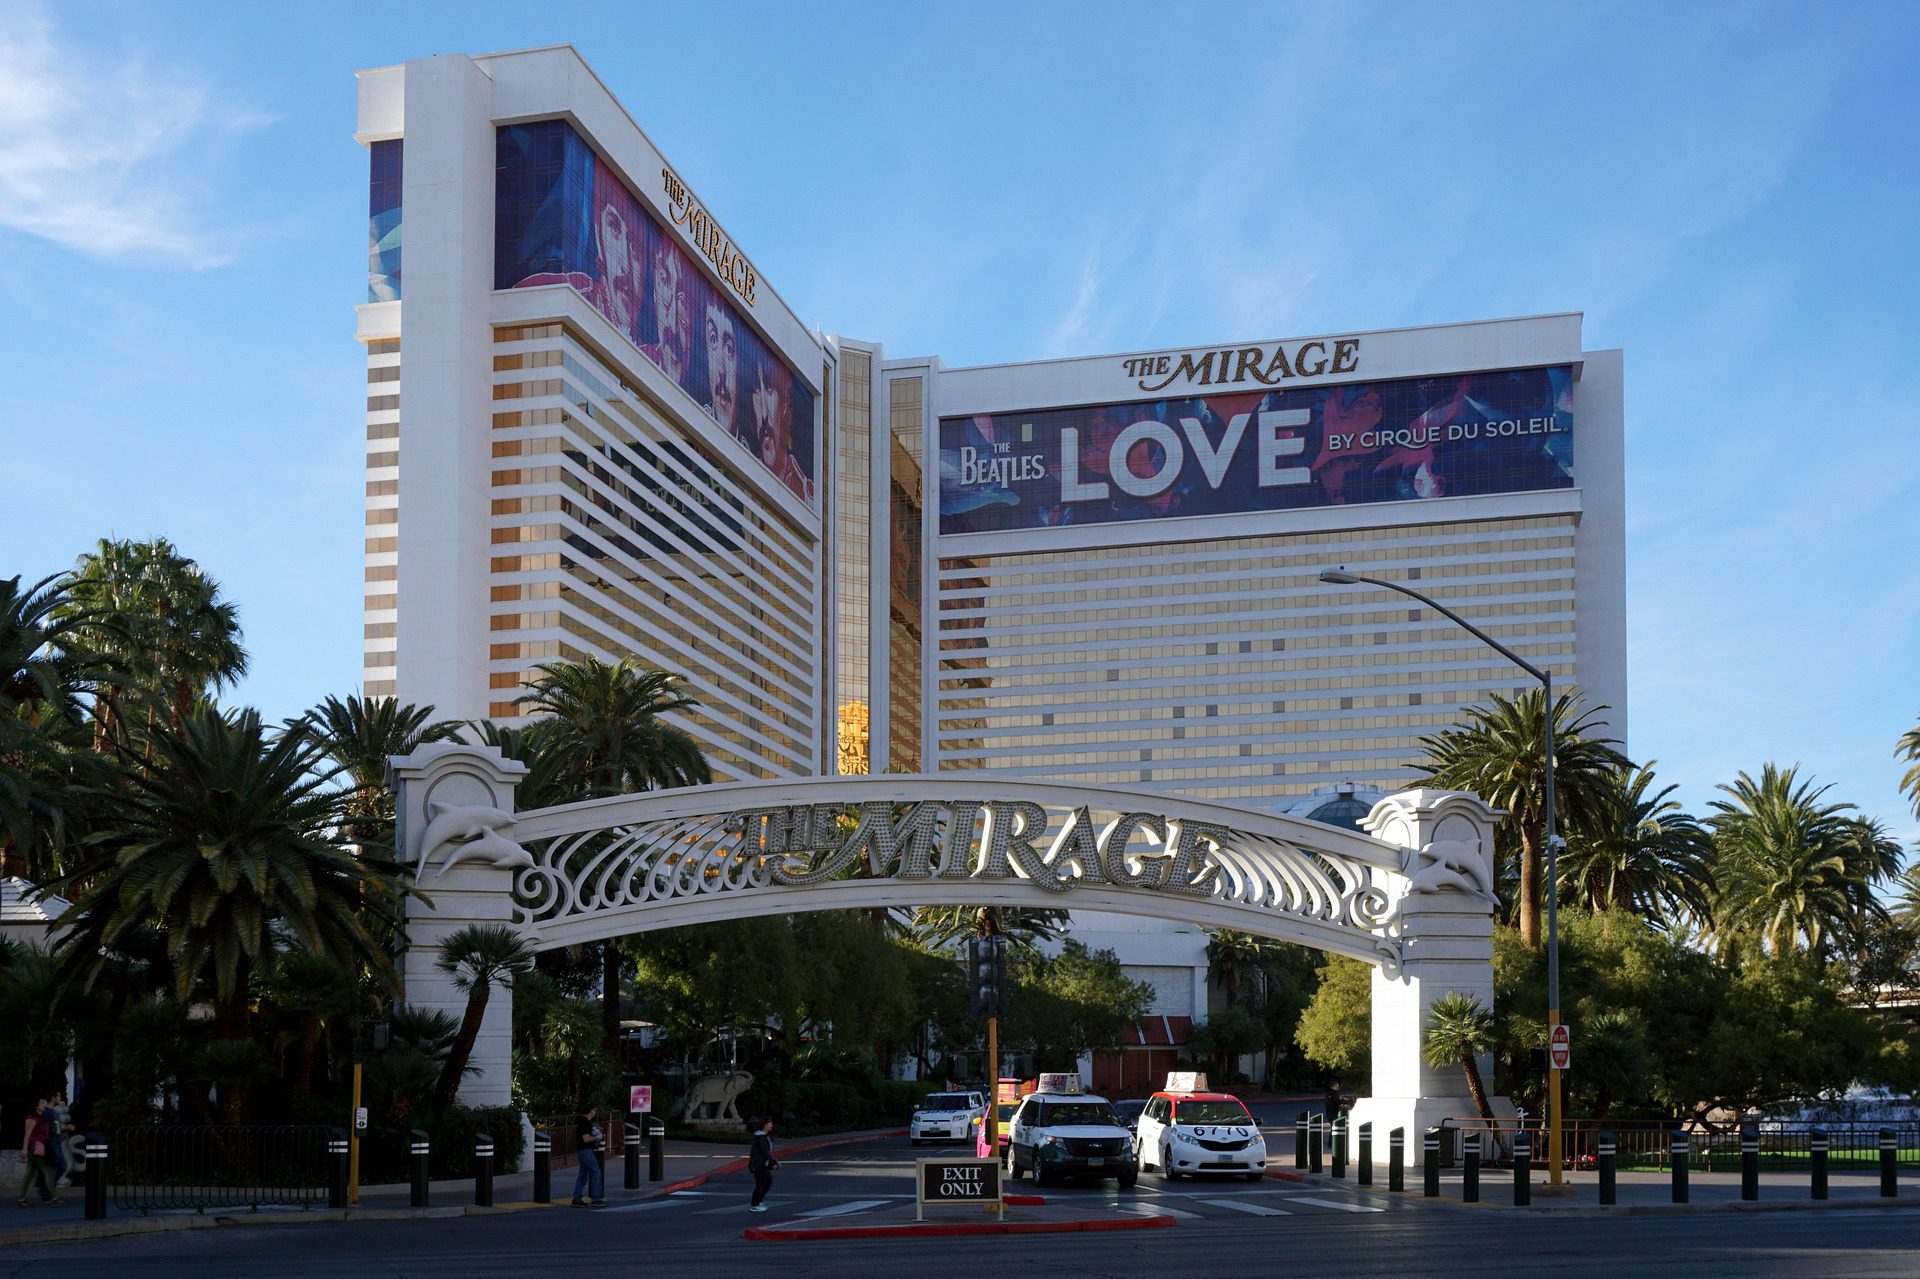 LOVE show at The Mirage, Las Vegas